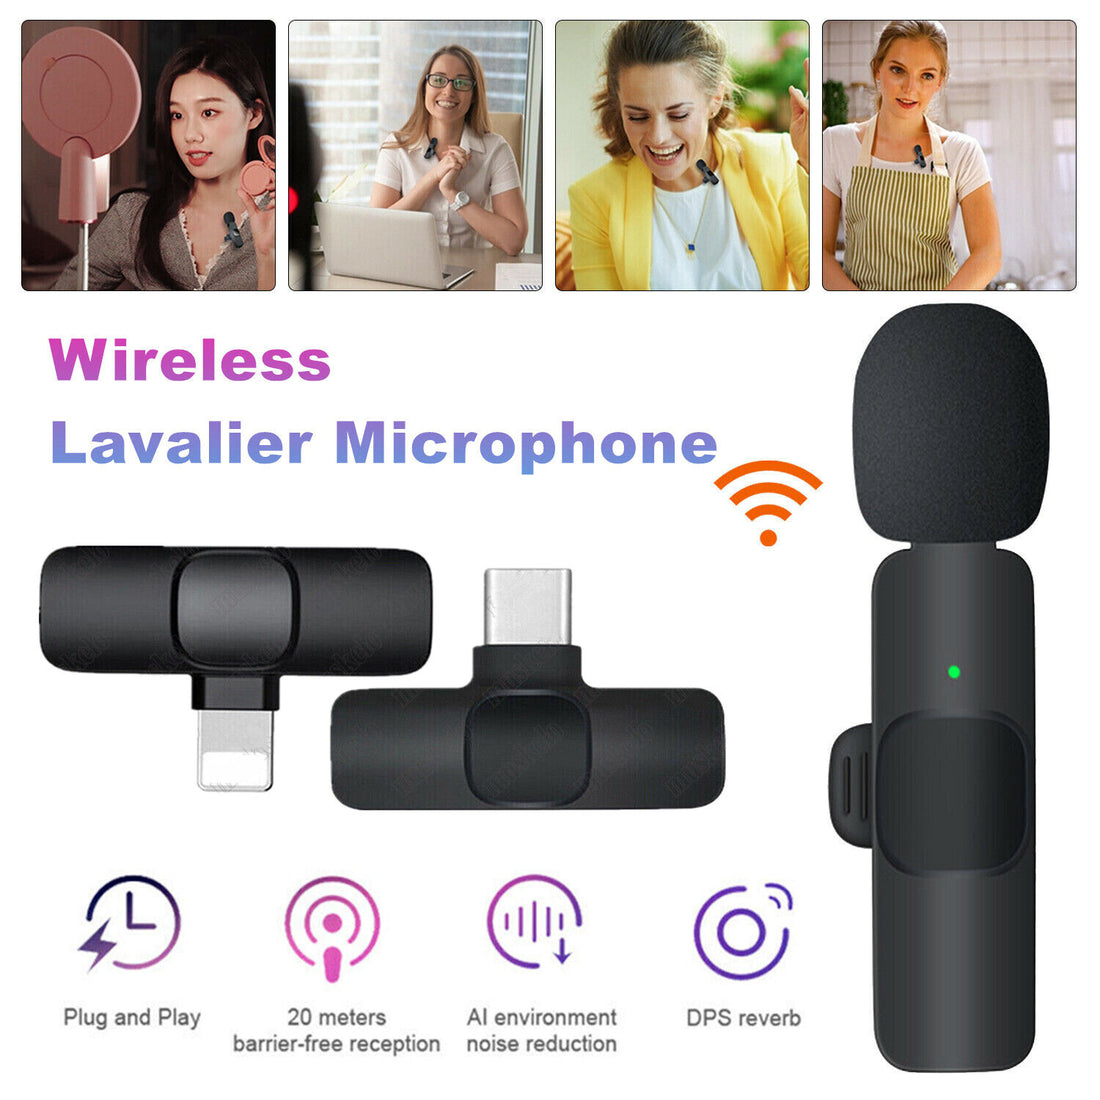 Lavalier Mini Microphone Wireless Audio Video Recording With Phone Charging - Ozthentic